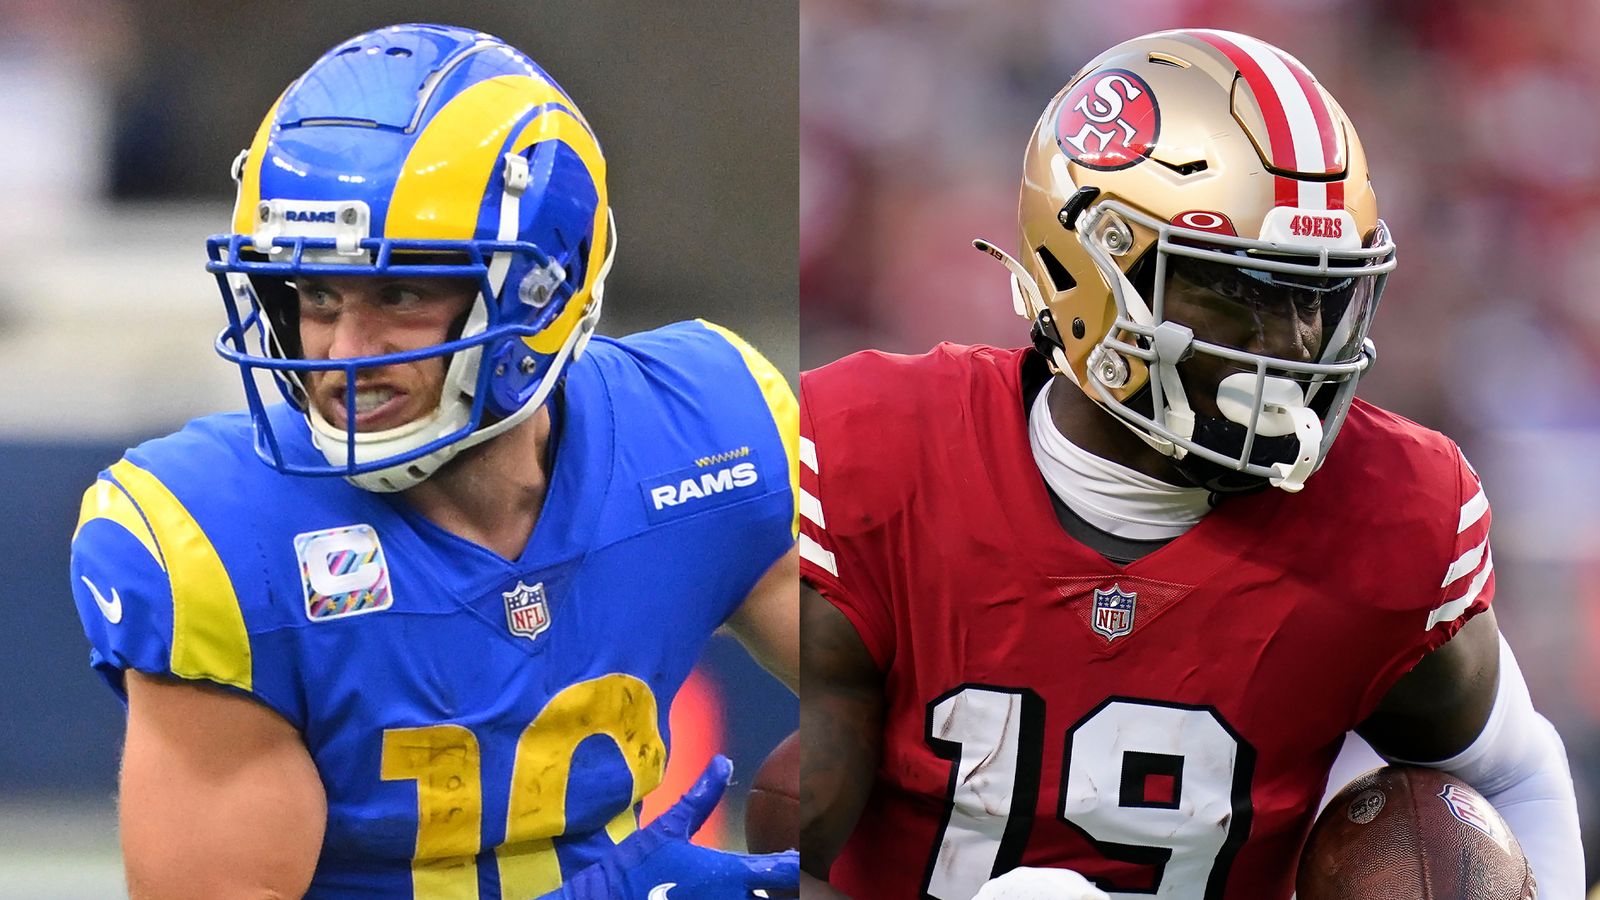 when are the rams and the 49ers playing